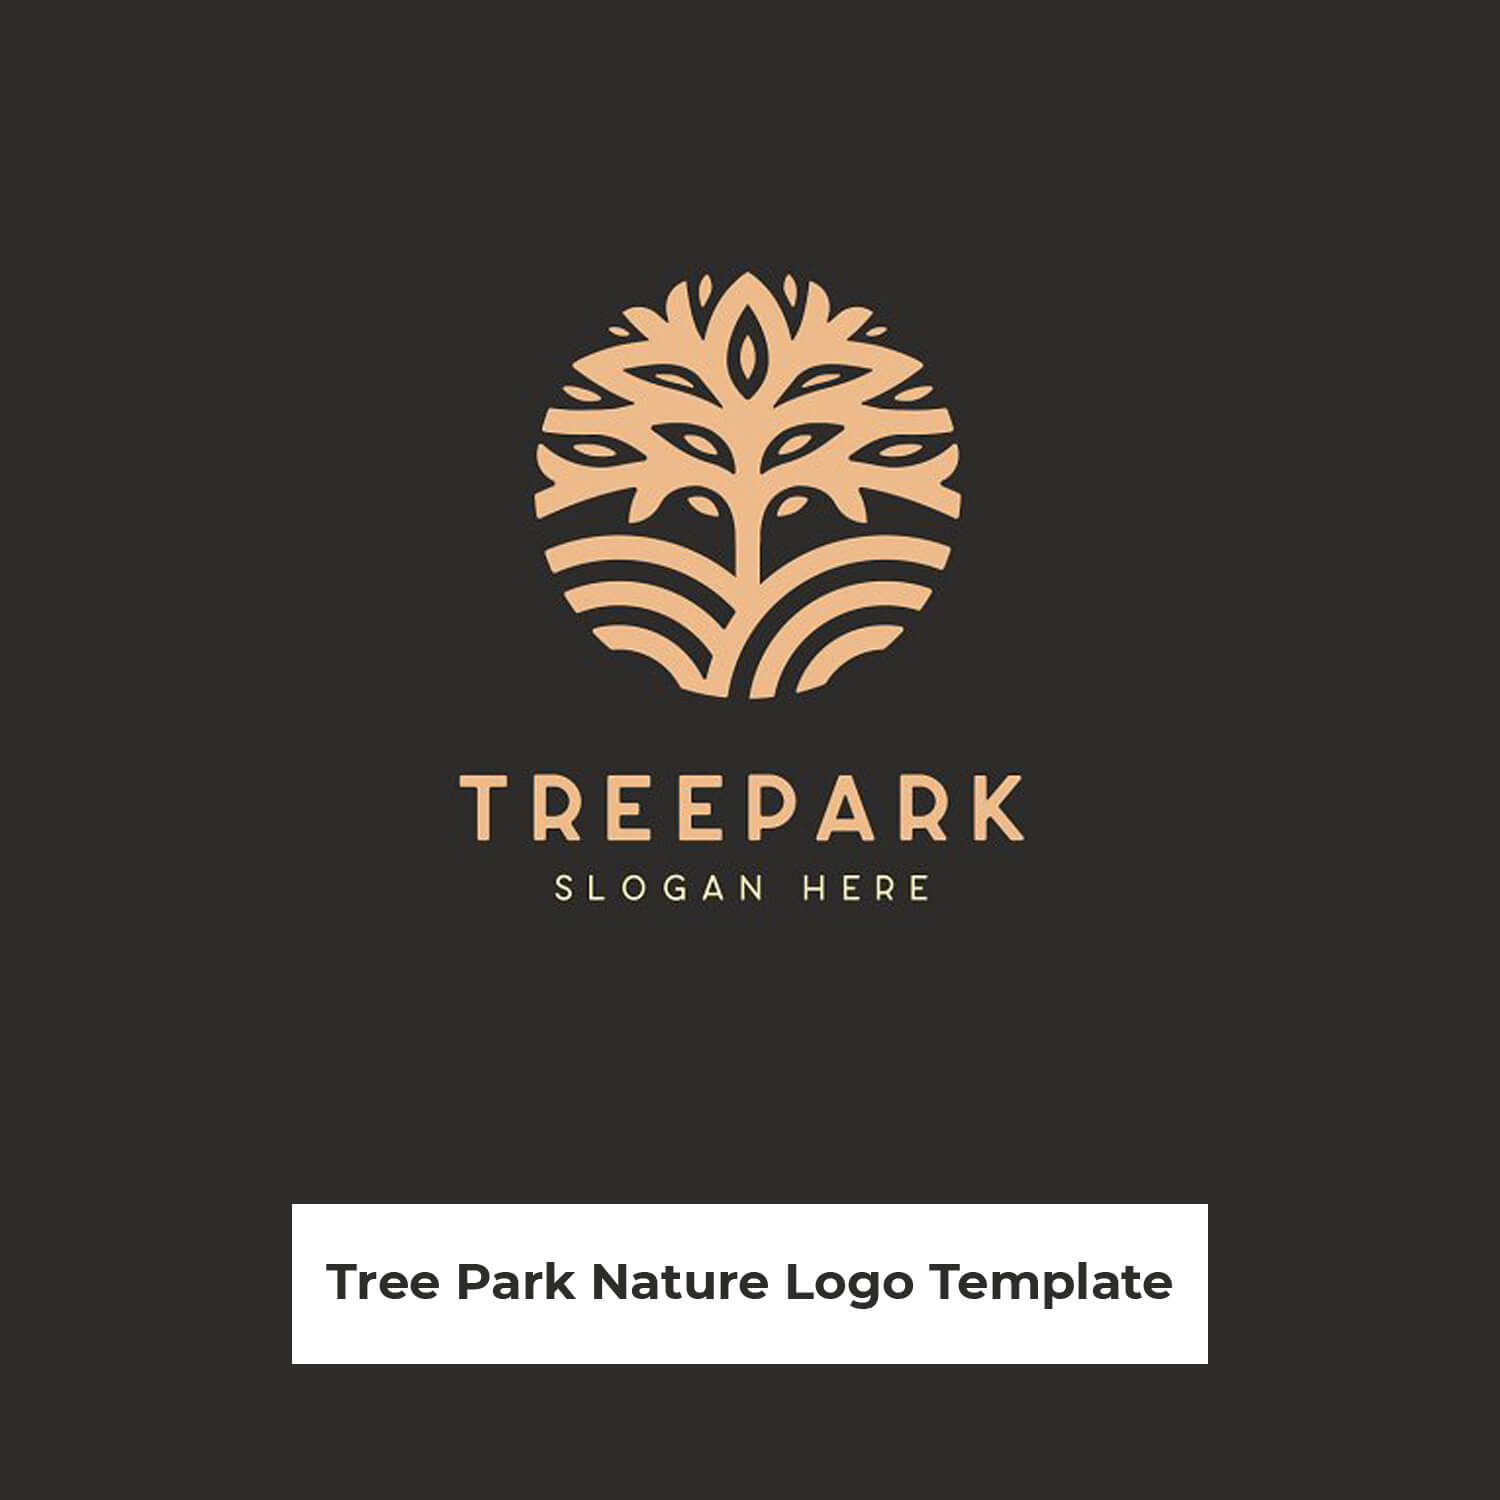 On a black background, a round logo with an image of a beige tree.